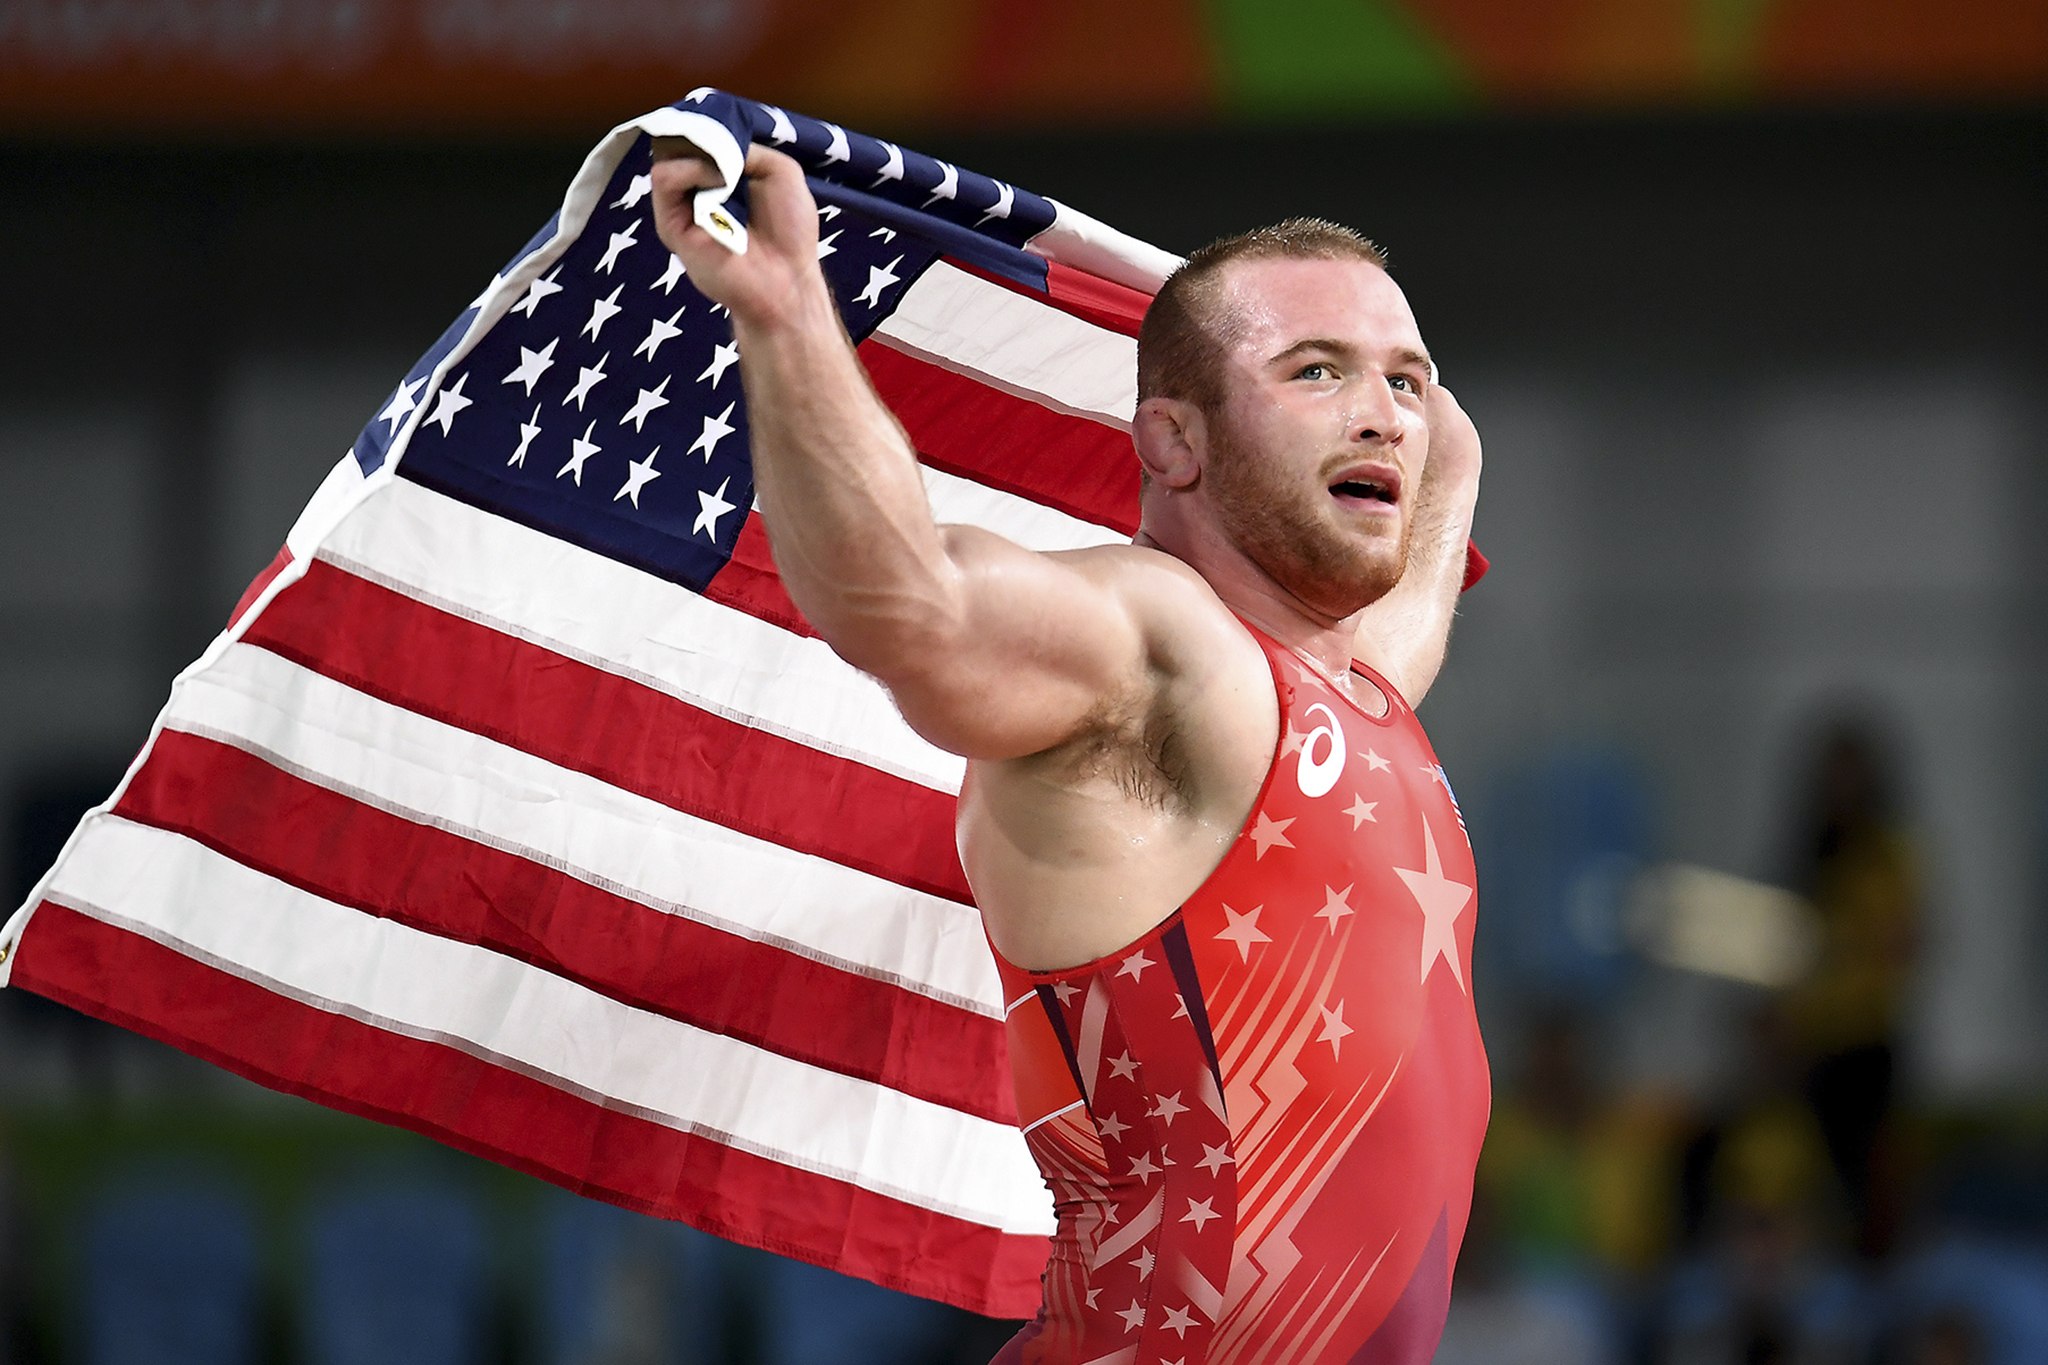 Kyle Snyder, 20, becomes youngest gold-medal winning American wrestler in history